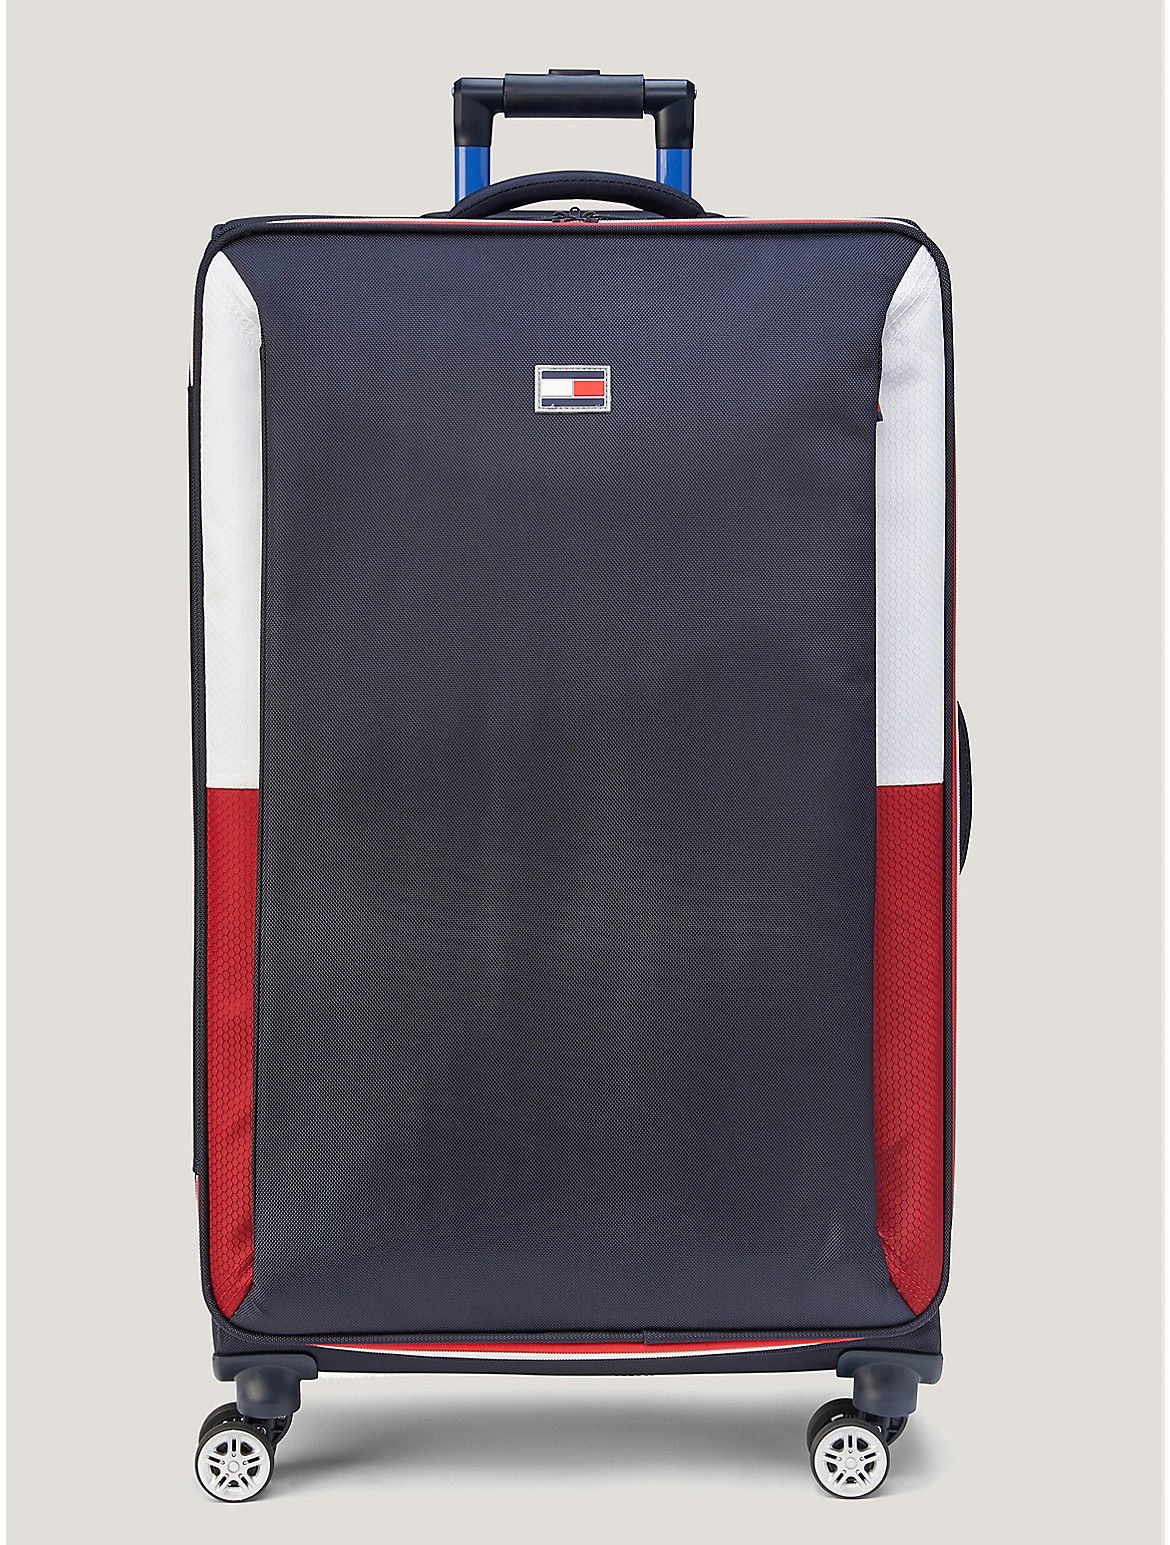 Tommy Hilfiger 28" Soft Case Luggage In Navy